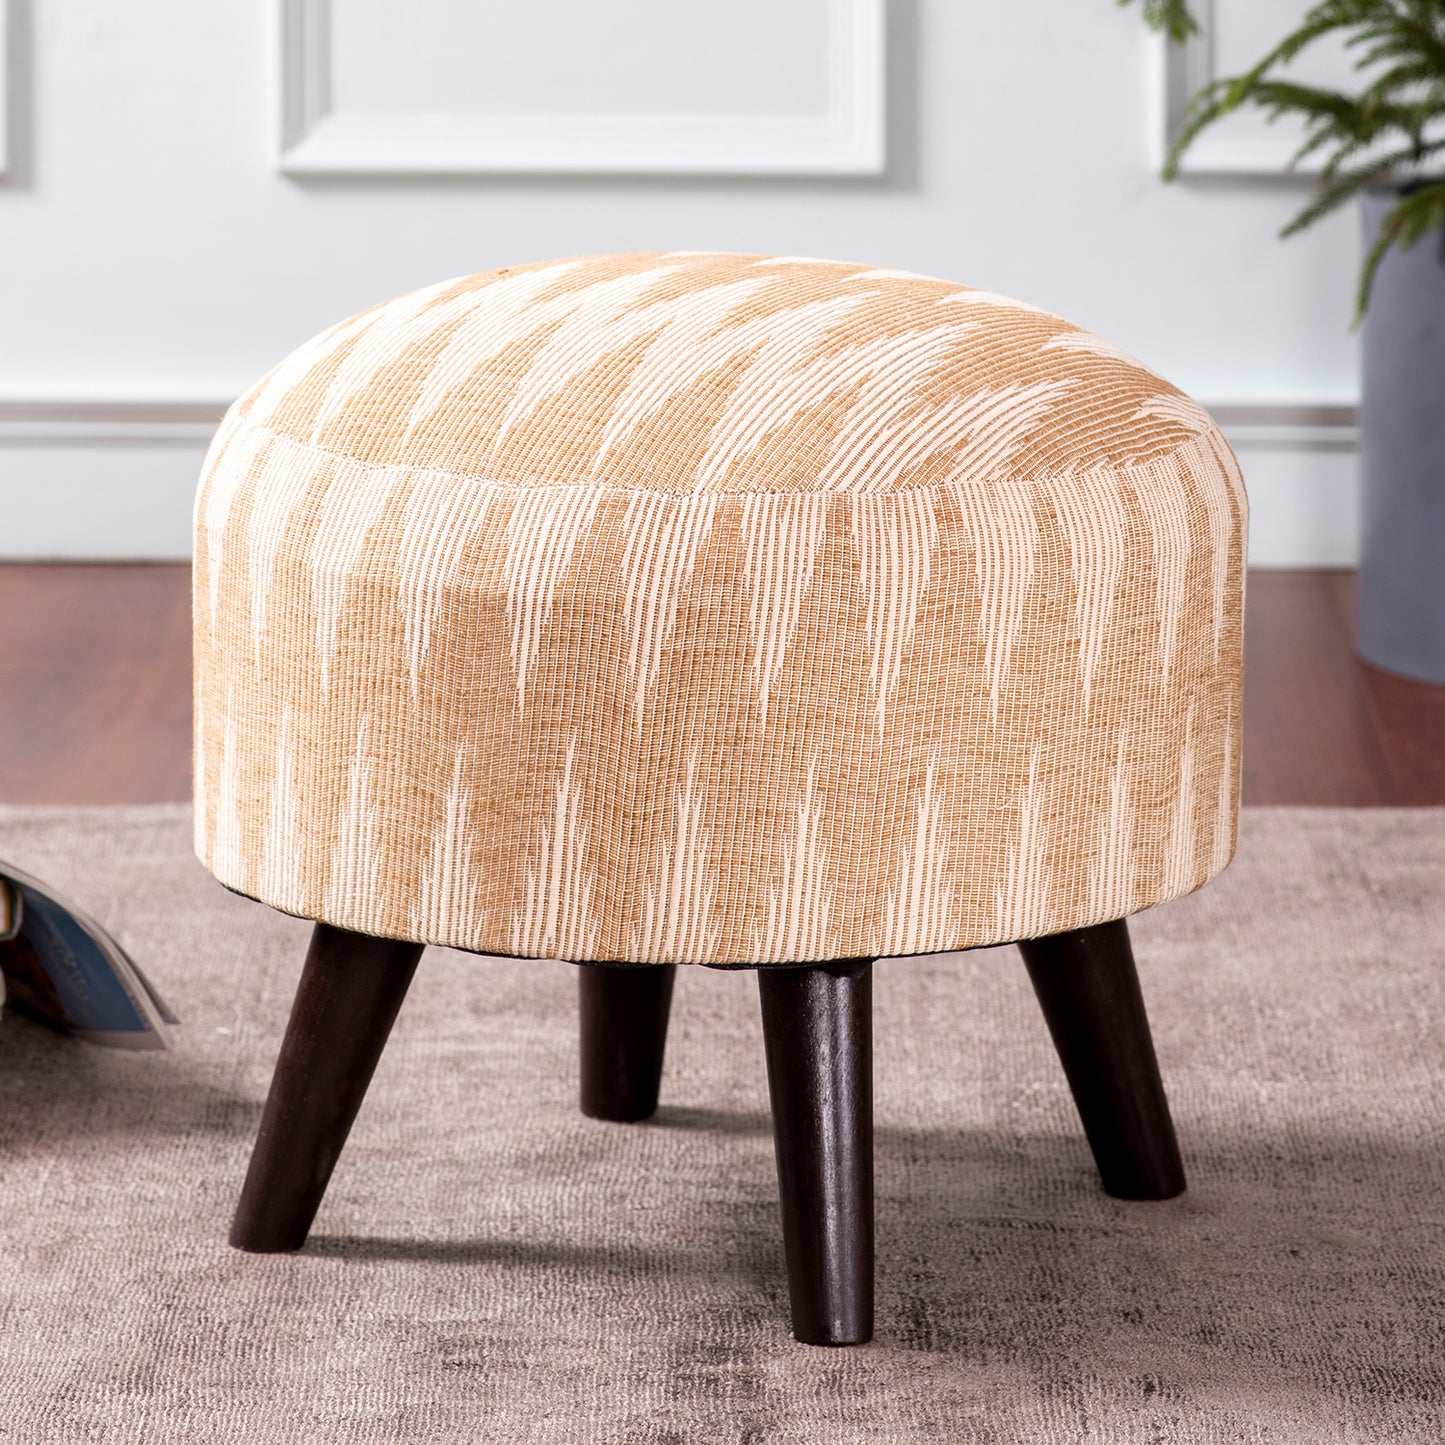 Crest Jacquard Wooden Ottoman in Beige Color